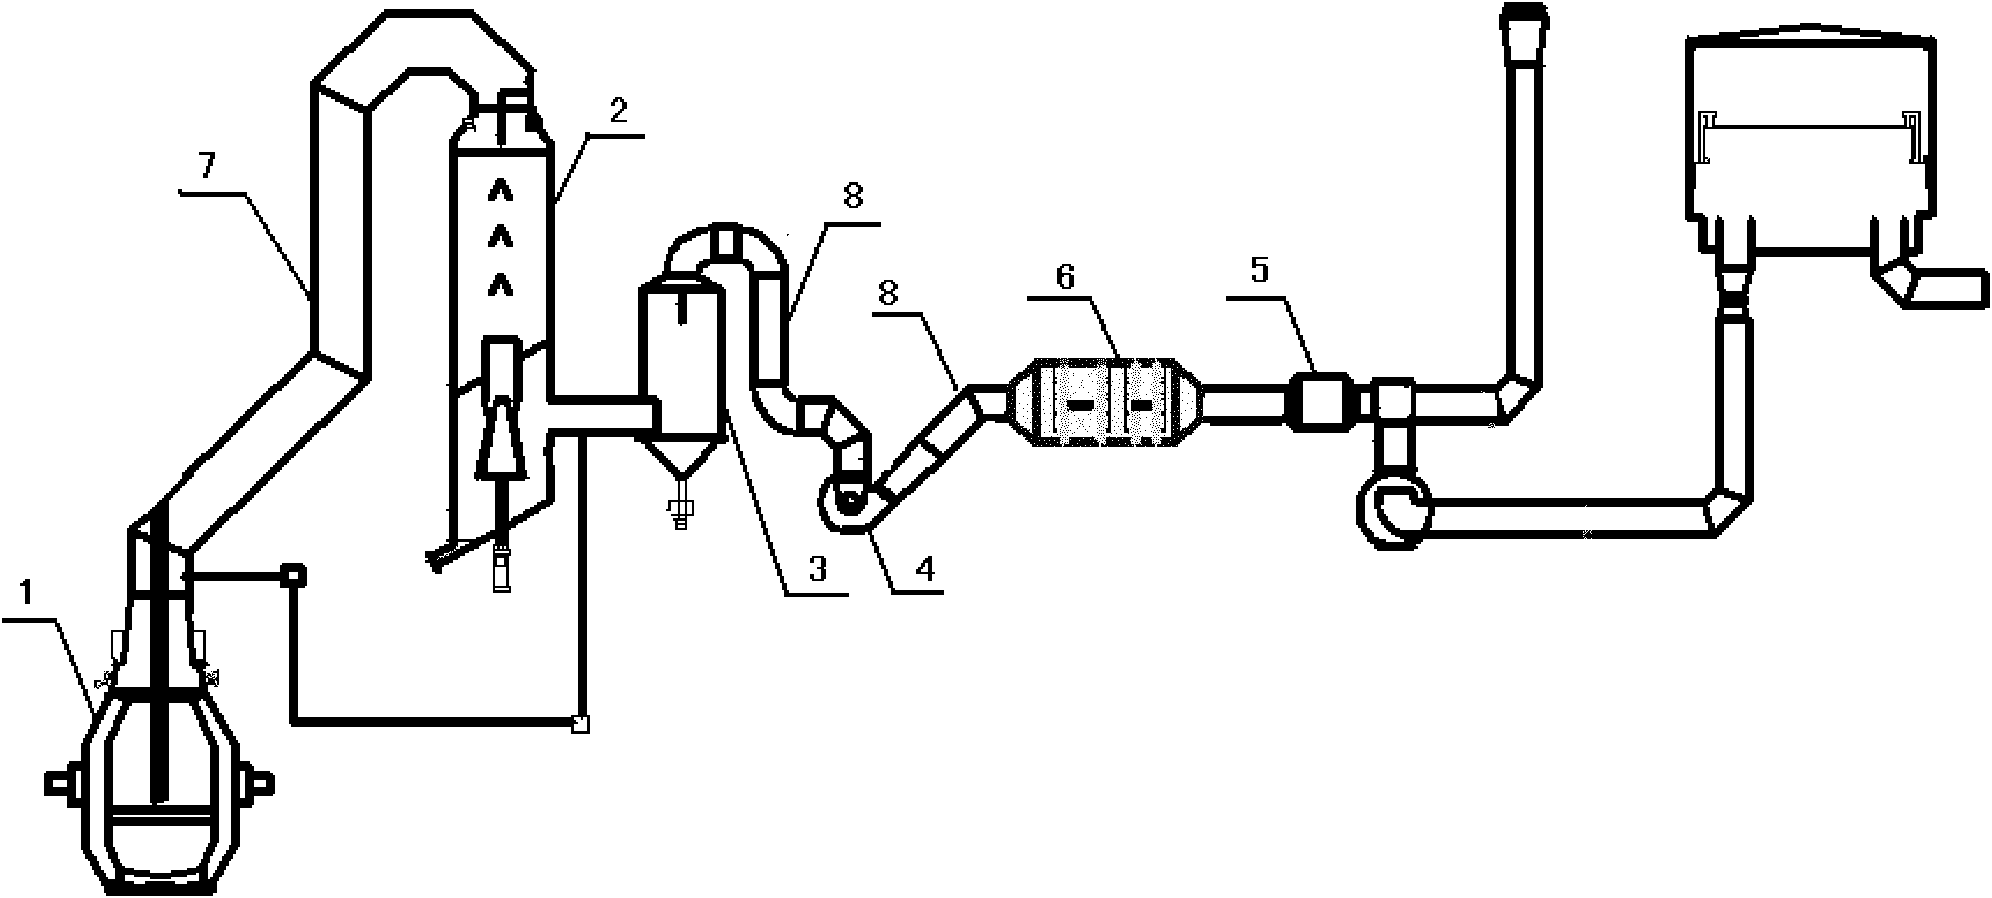 Primary dedusting system for rotating furnace